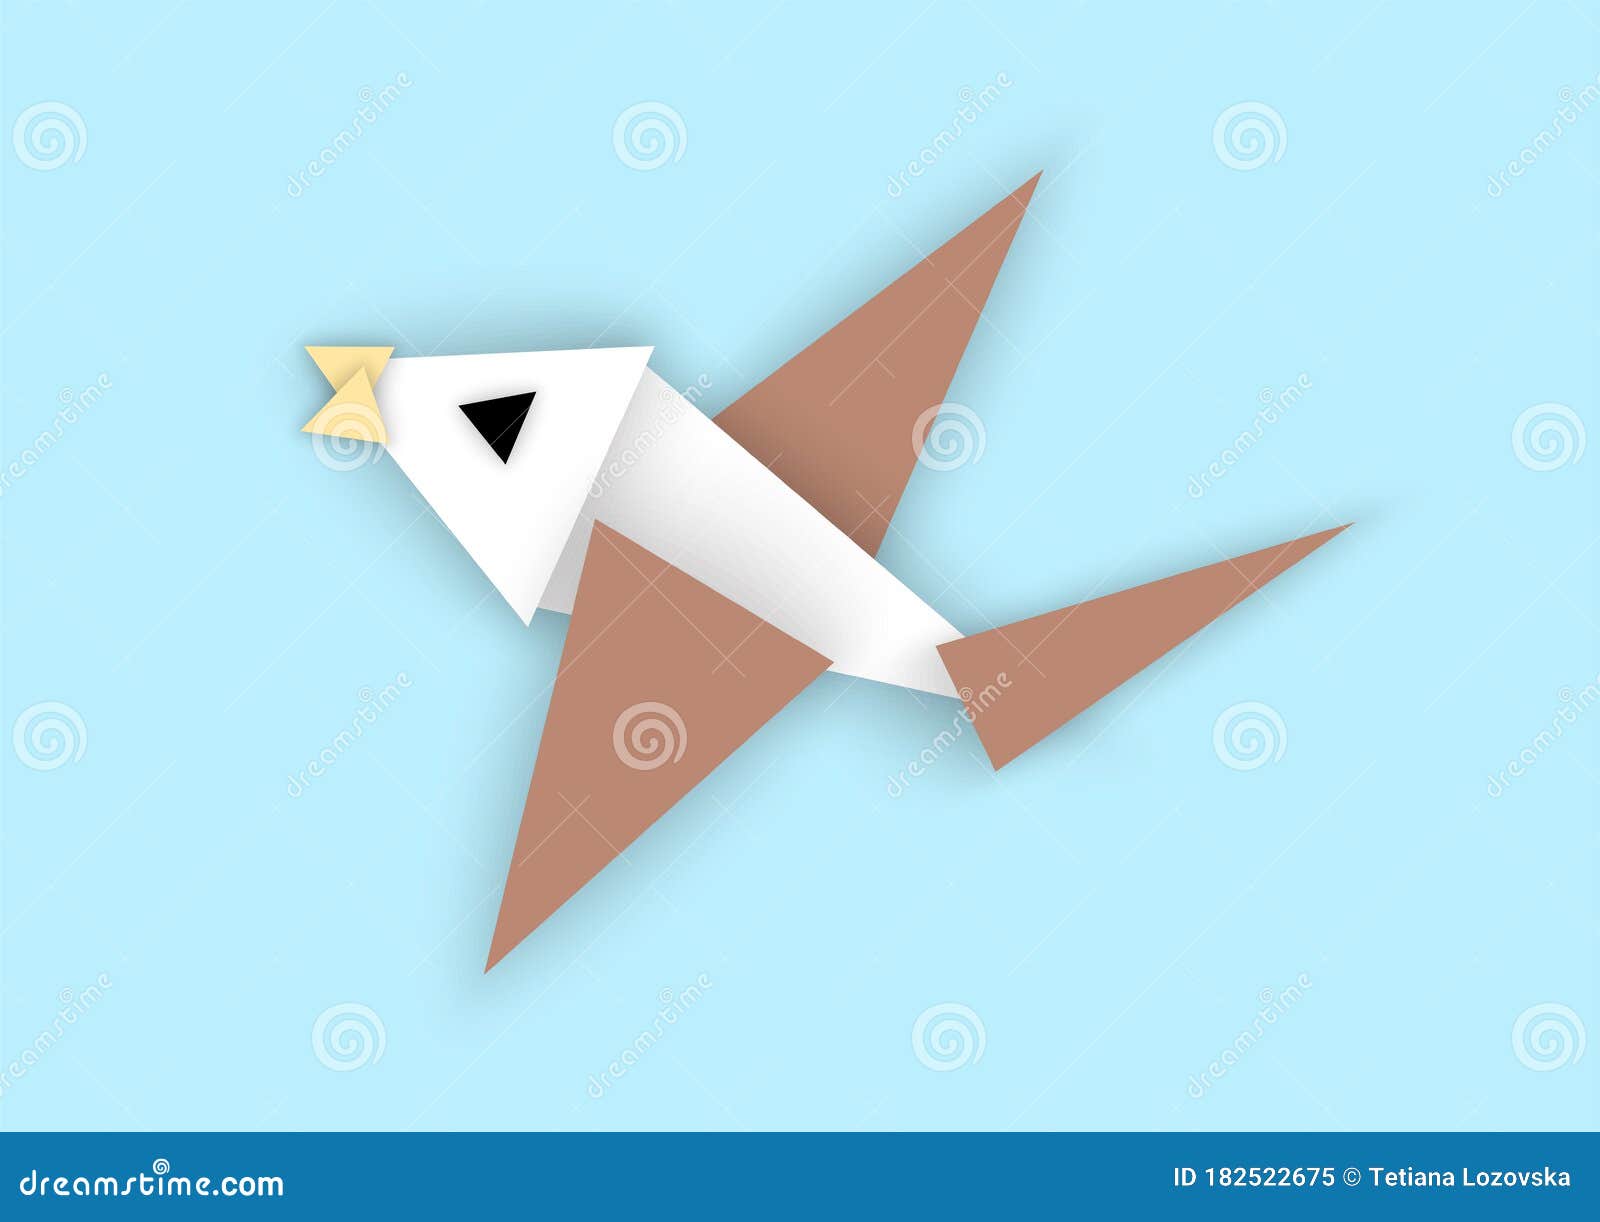 Bird of Triangles in Abstract Paper Cut Style Stock Vector ...